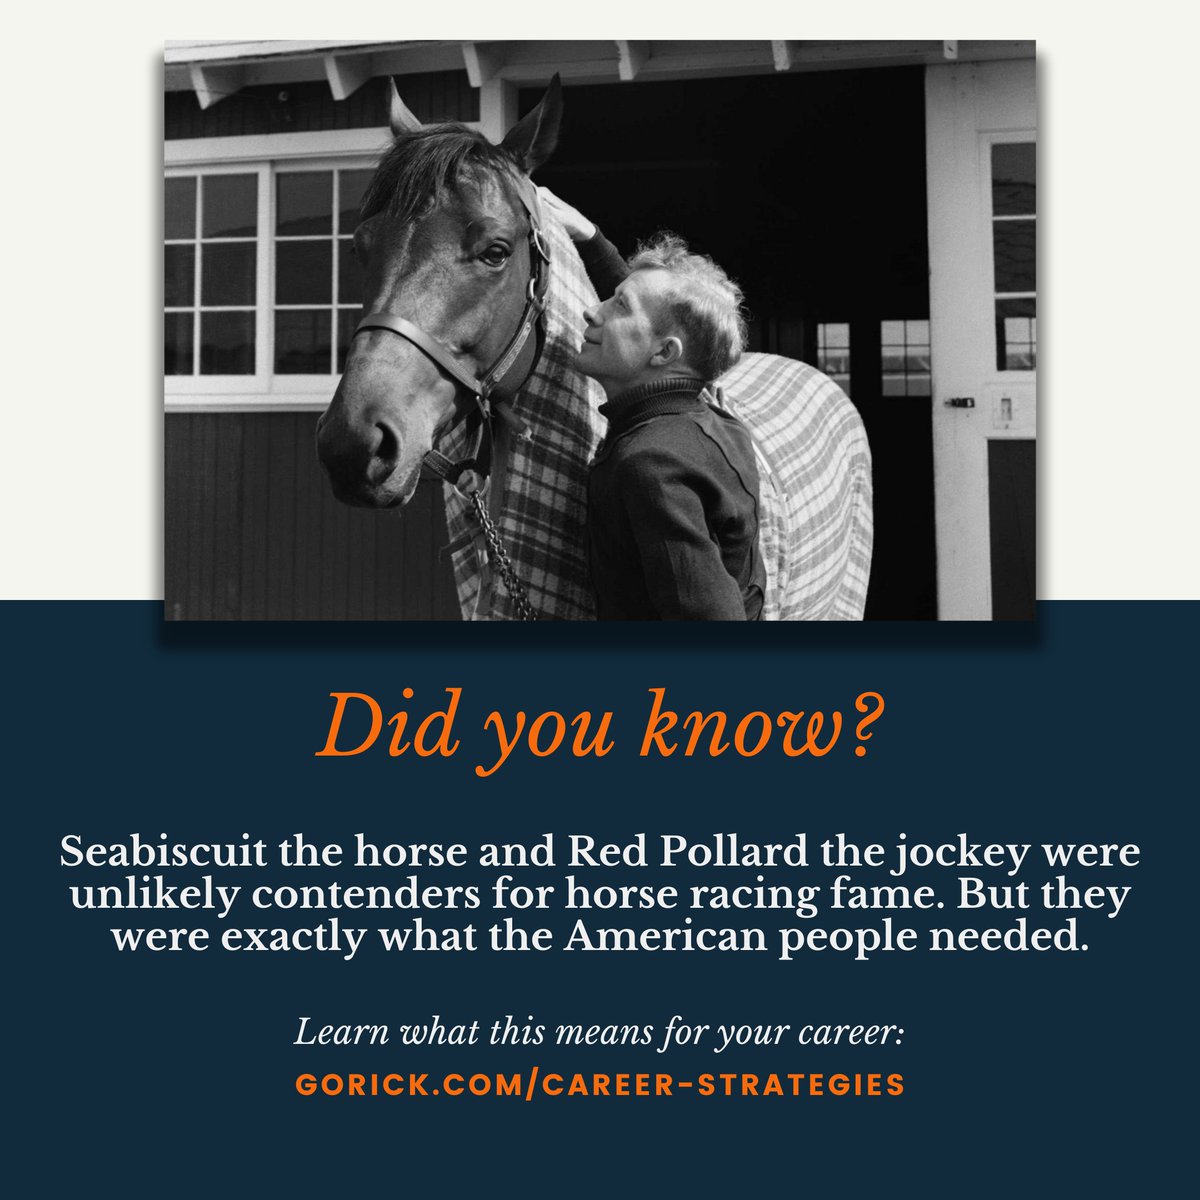 Racehorse Seabiscuit and jockey Red Pollard were underdogs that became a symbol of hope and second chances. What can Seabiscuit and Pollard teach us about building a strong #PersonalBrand? Find out this coming Monday: gorick.com/career-strateg… #Motivation #Careers